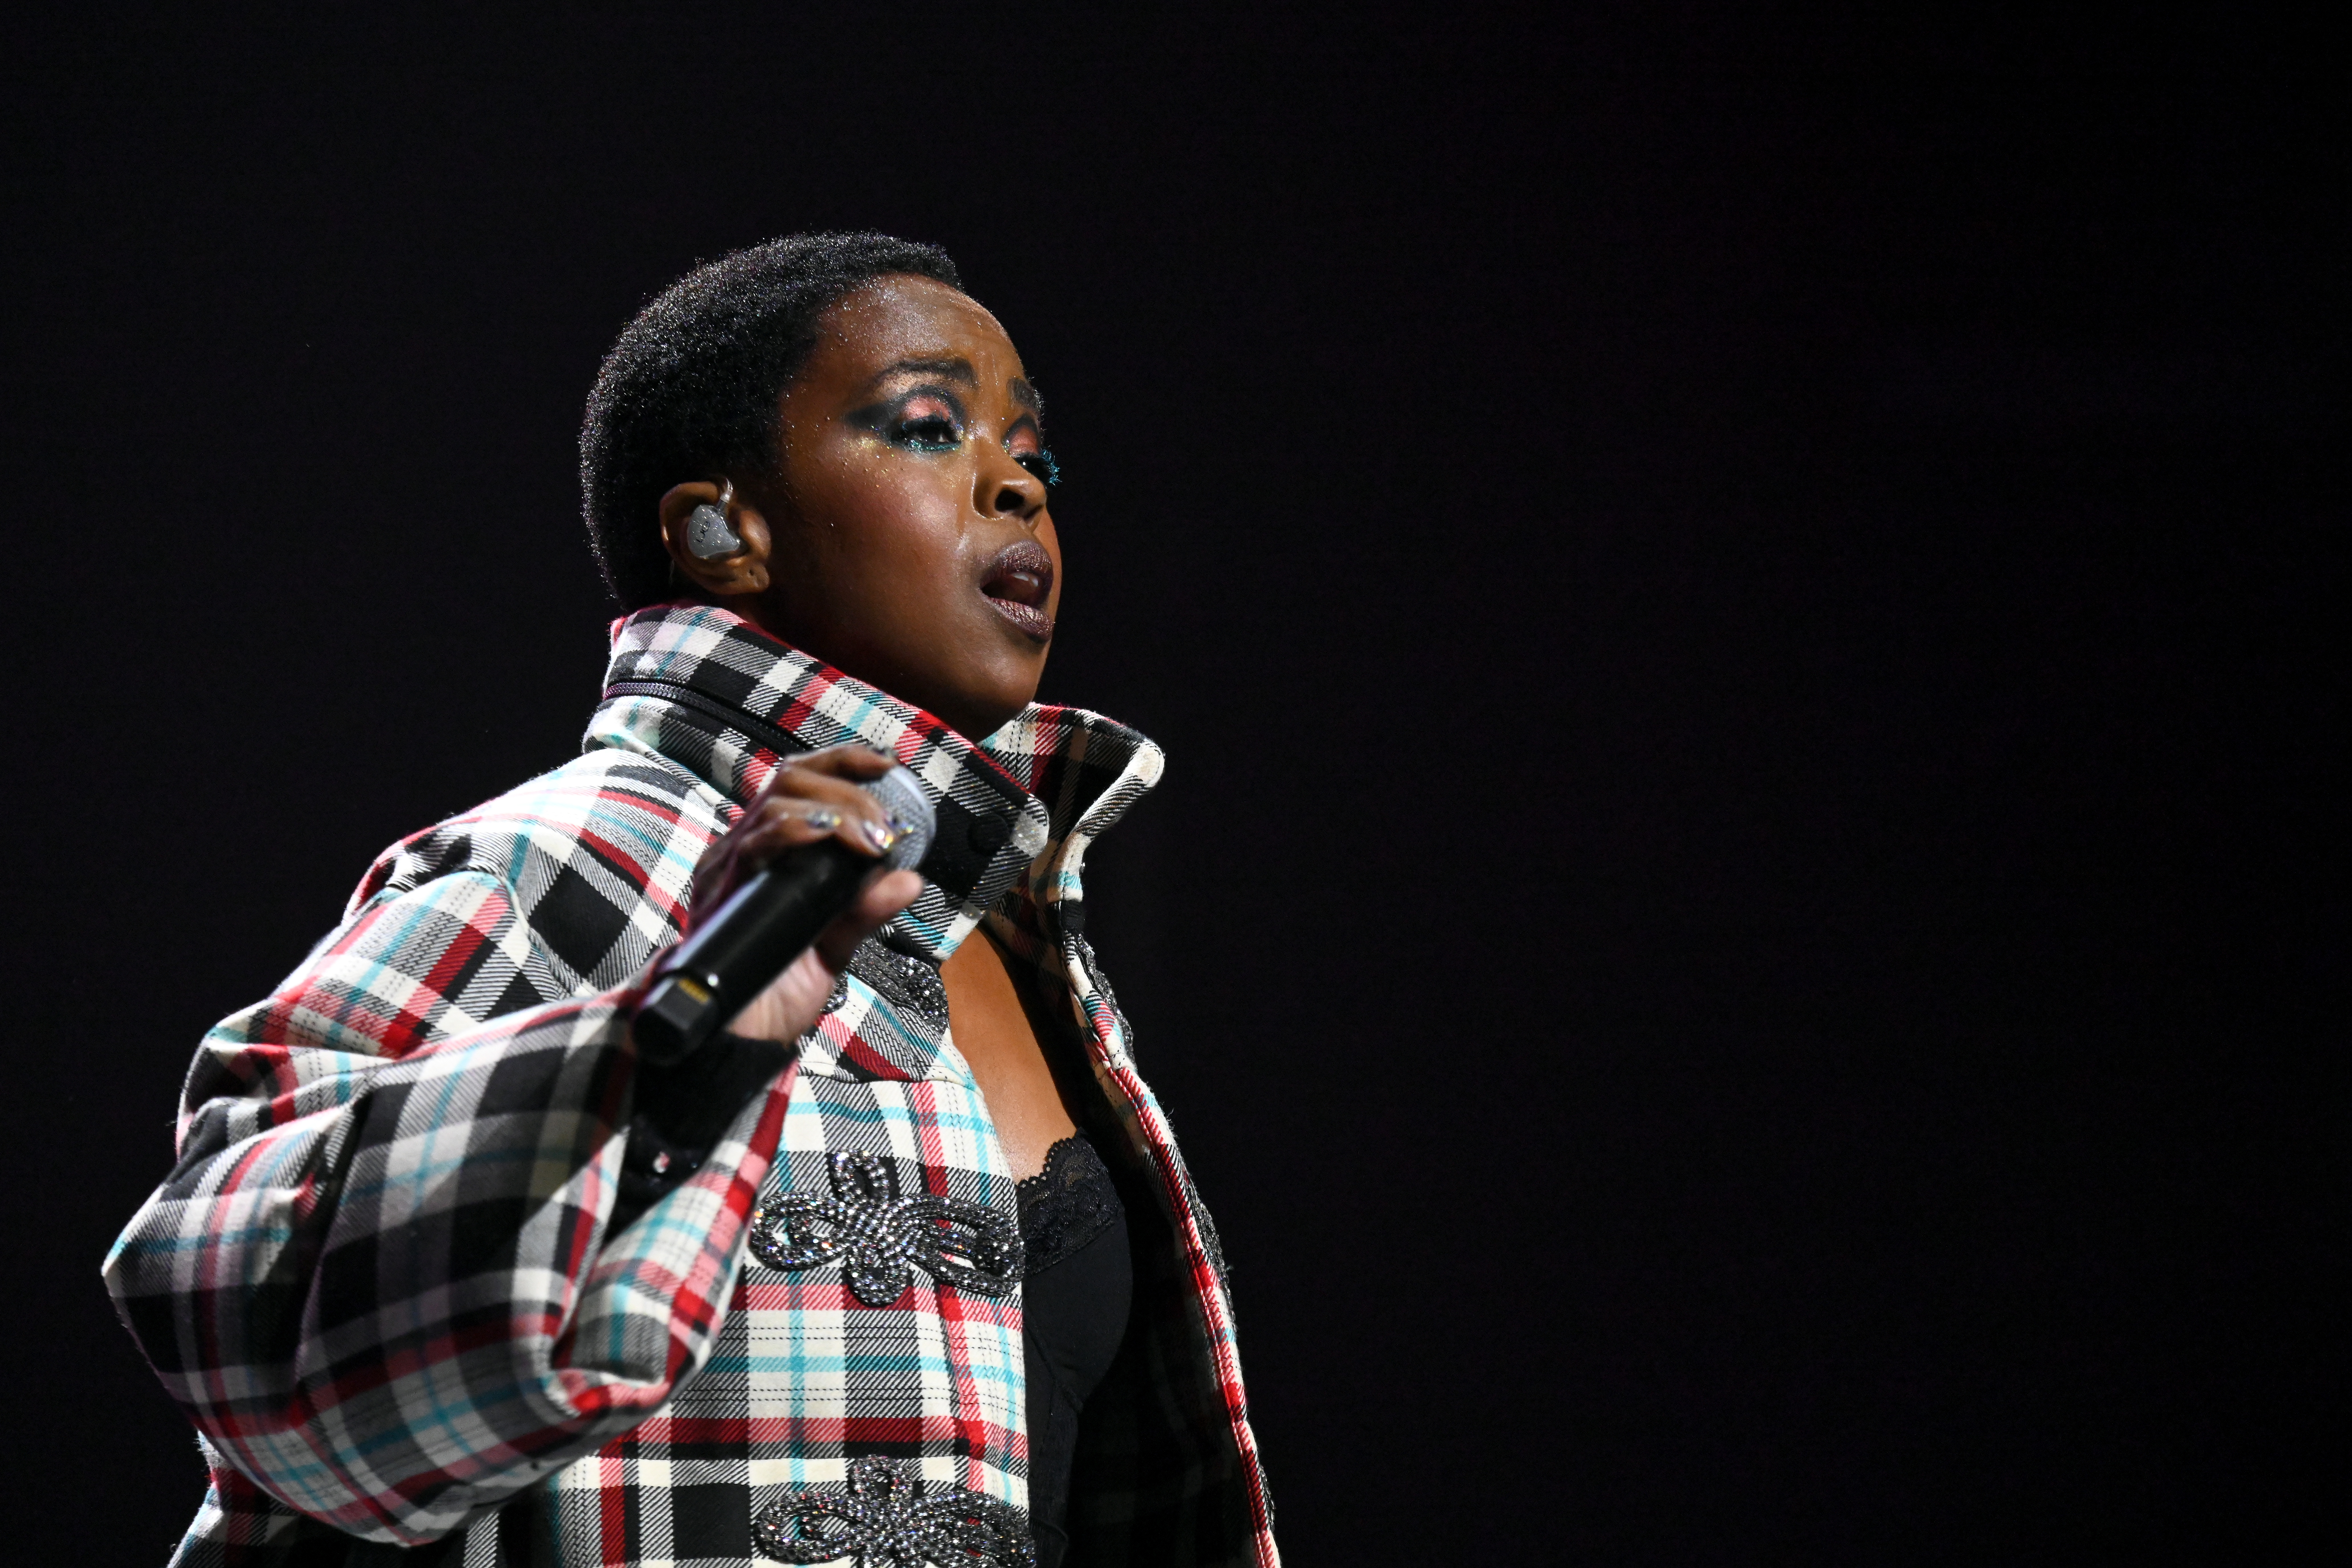 Lauryn Hill Settles Family Home Foreclosure Over $1M Tax Debt: Report